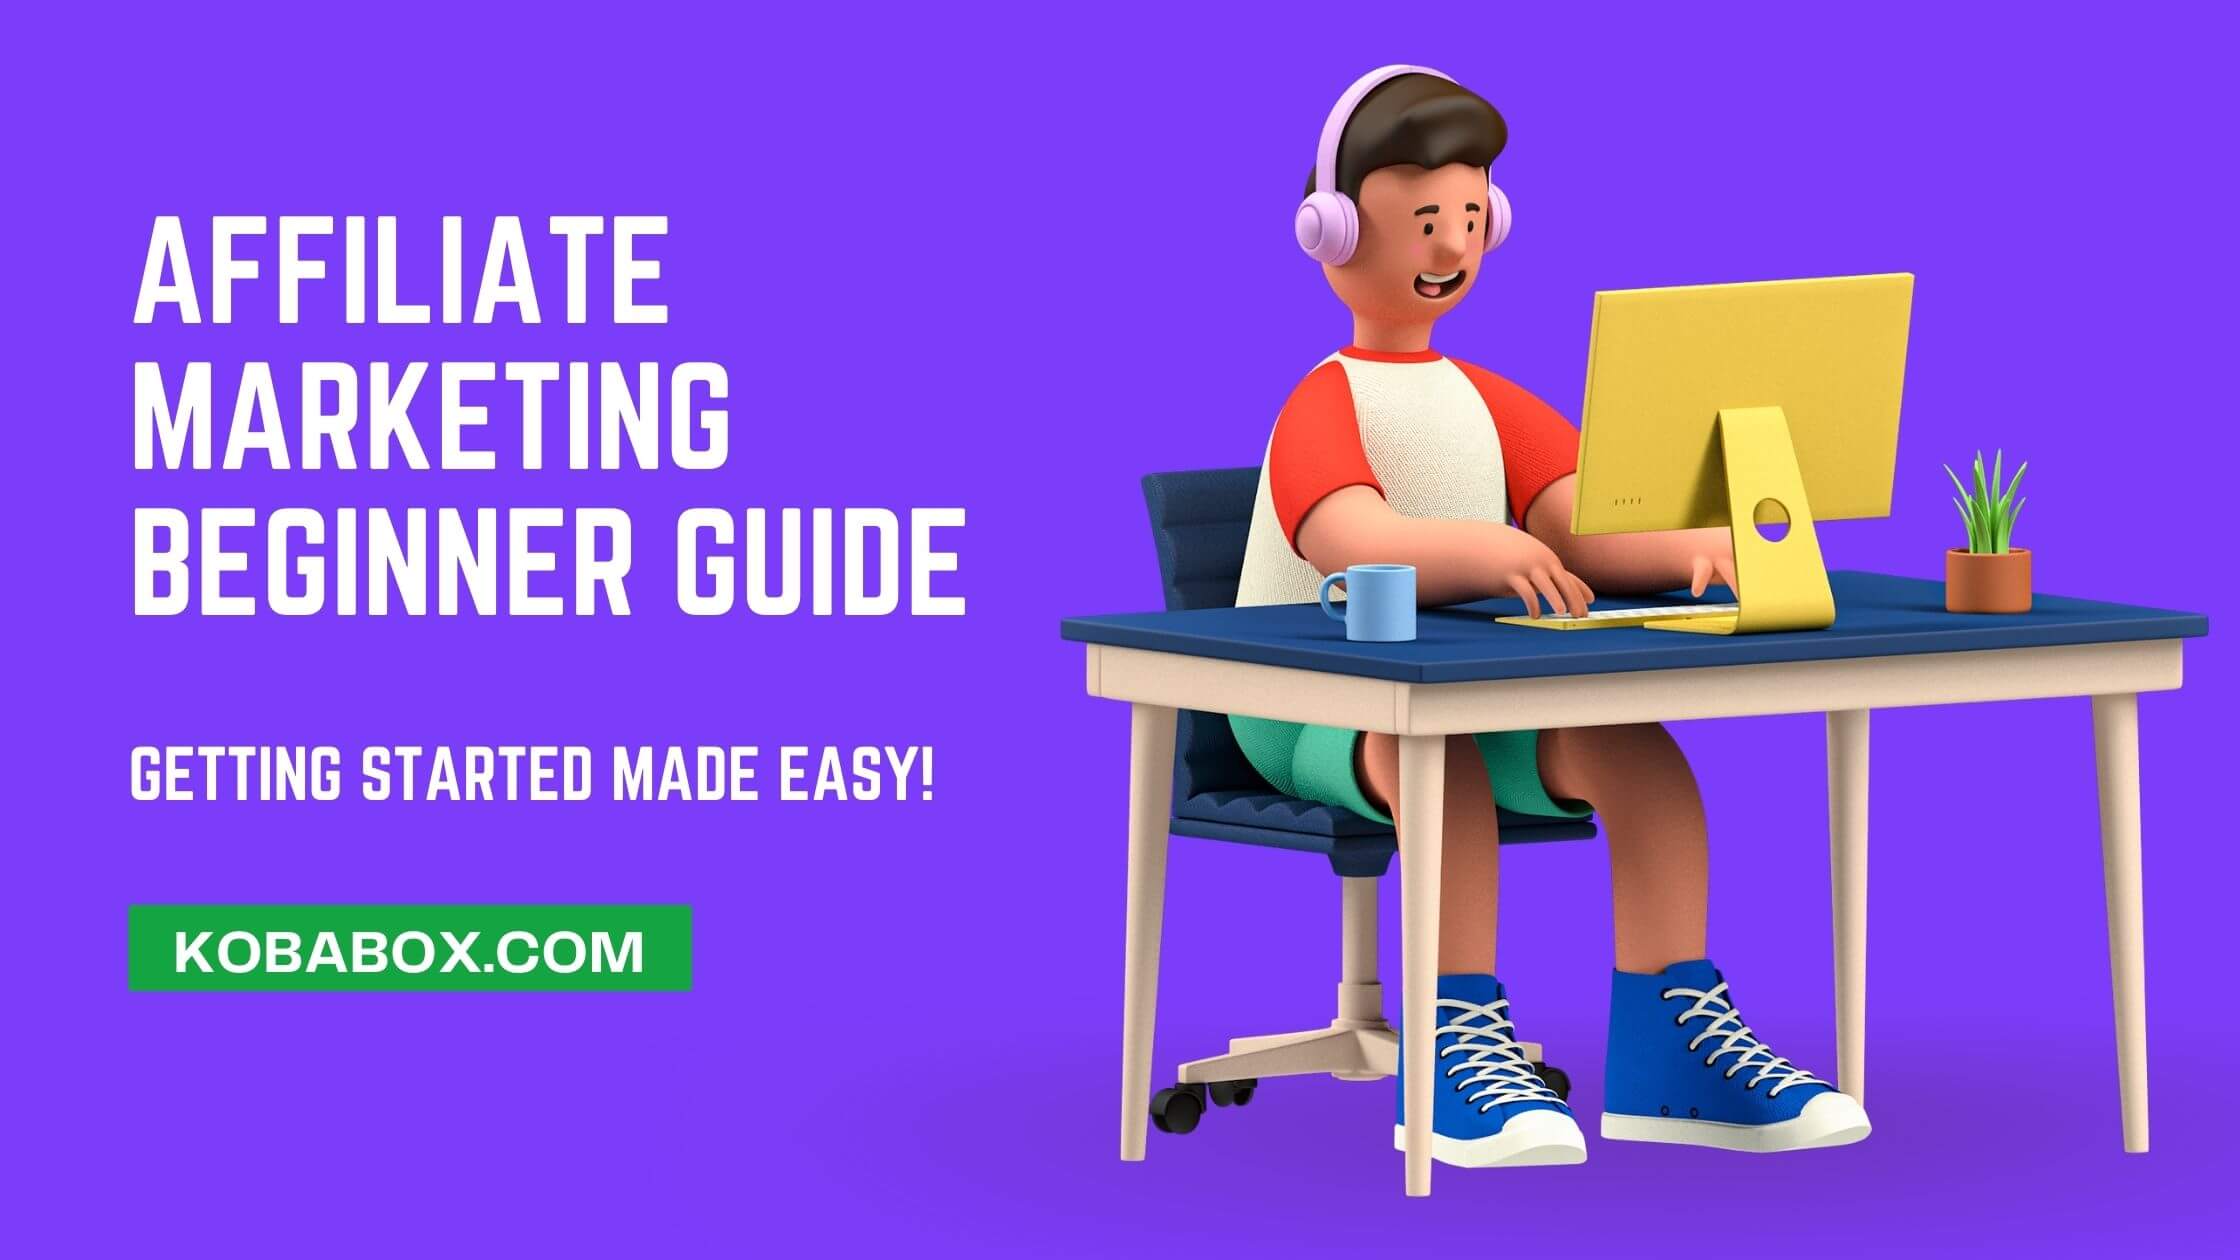 A Step-by-Step Affiliate Marketing Guide for Beginners